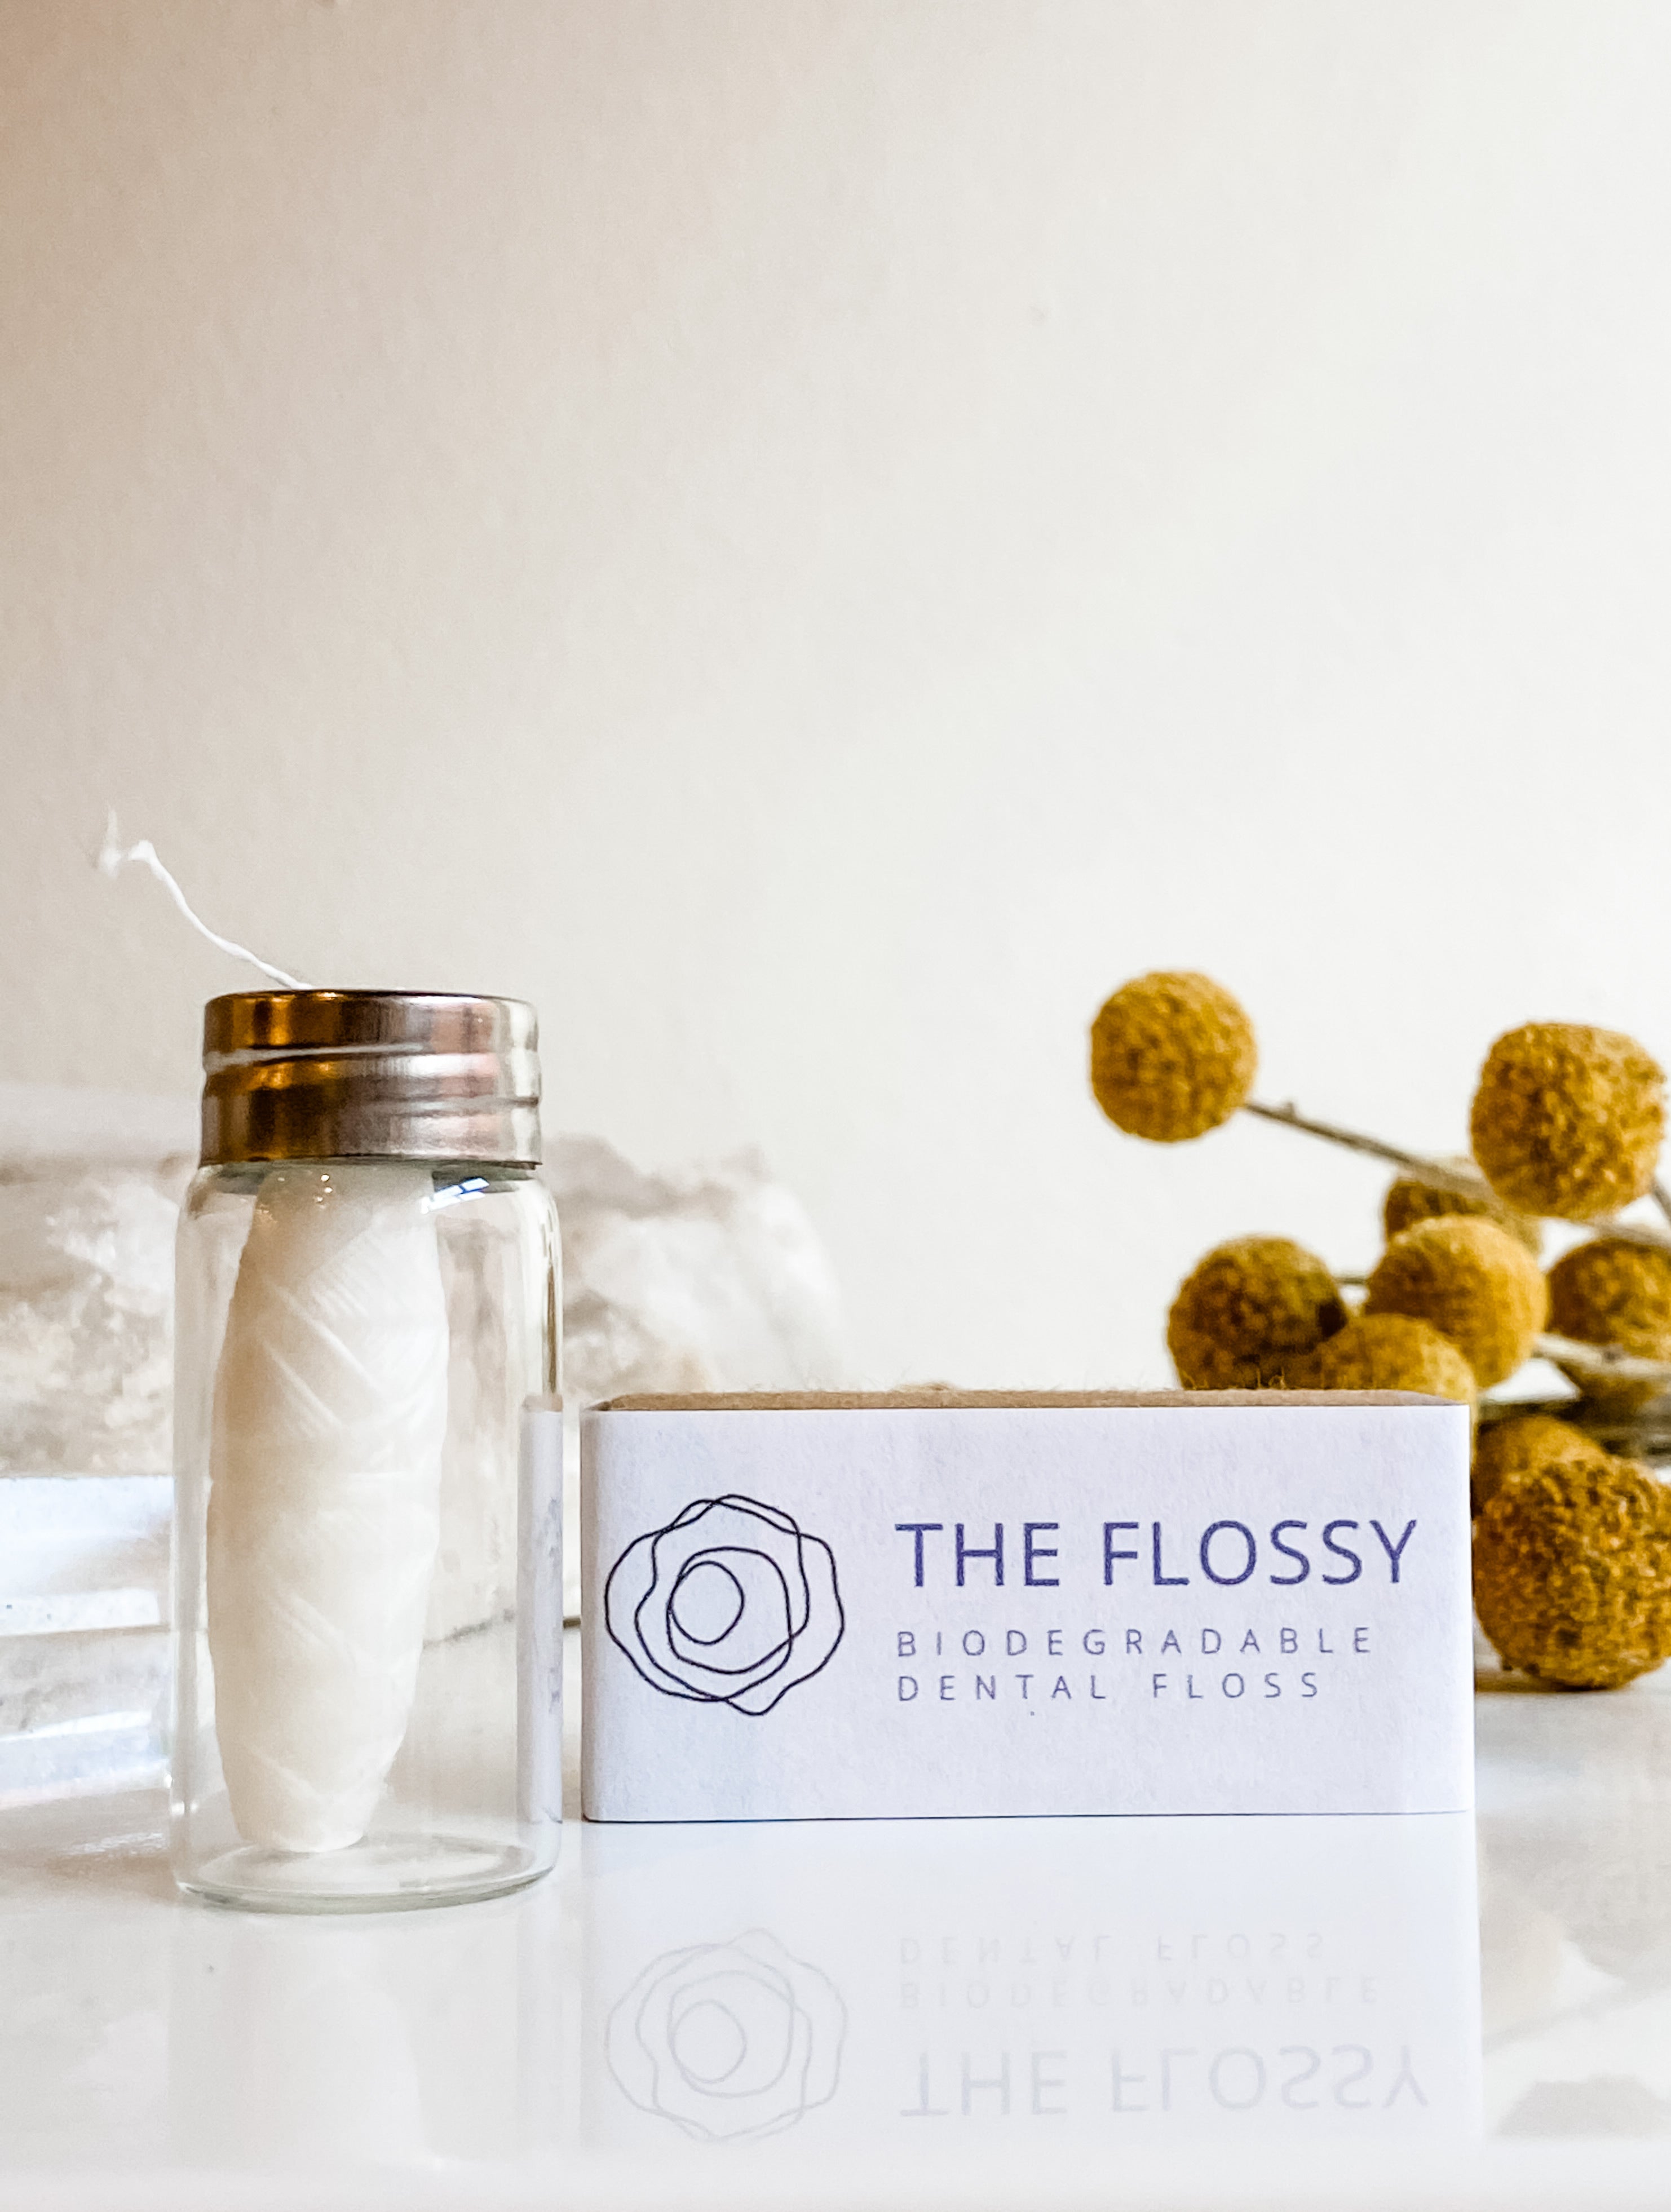 The Flossy - Biodegradable Dental Floss - Handmade with Natural Ingredients. Hidden Forest Naturals